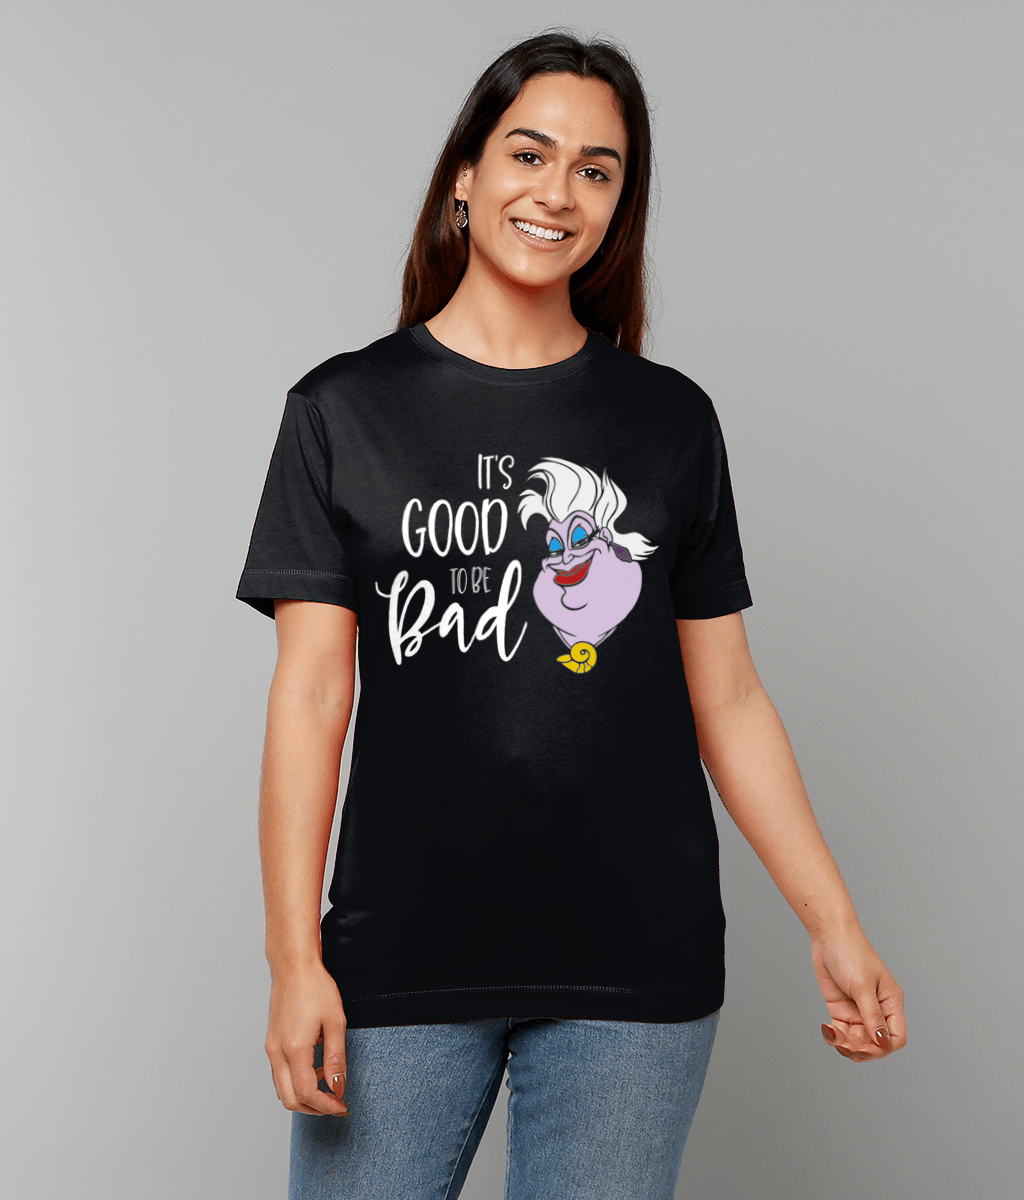 It's Good To Be Bad: T-Shirt